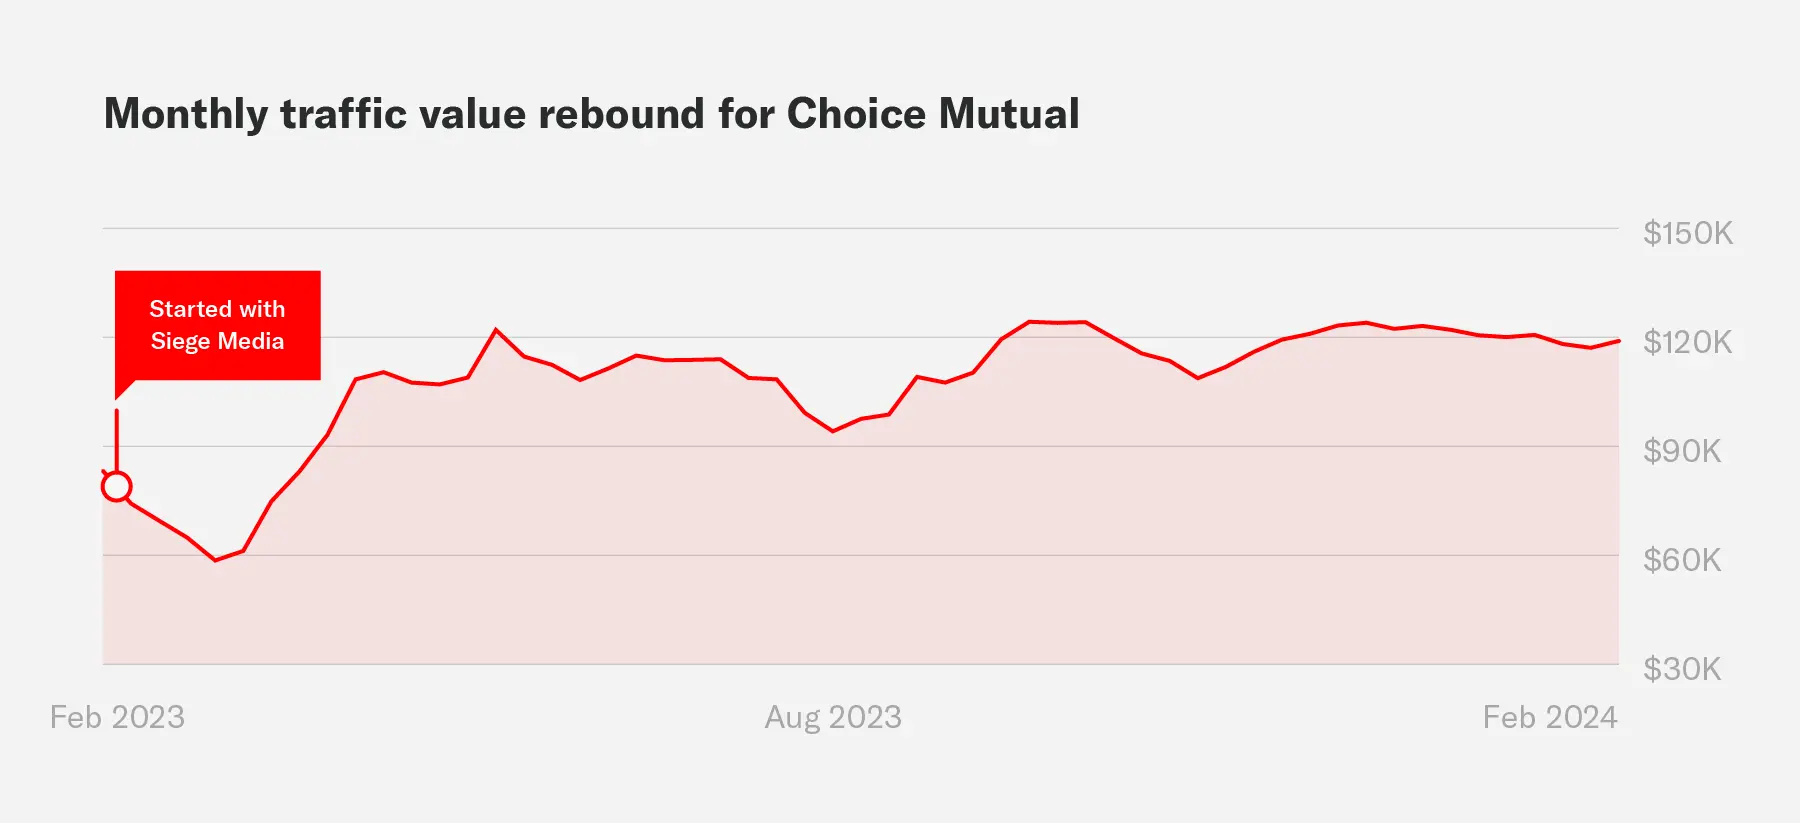 A graph showing the traffic value rebound for Choice Mutual during an engagement with Siege Media